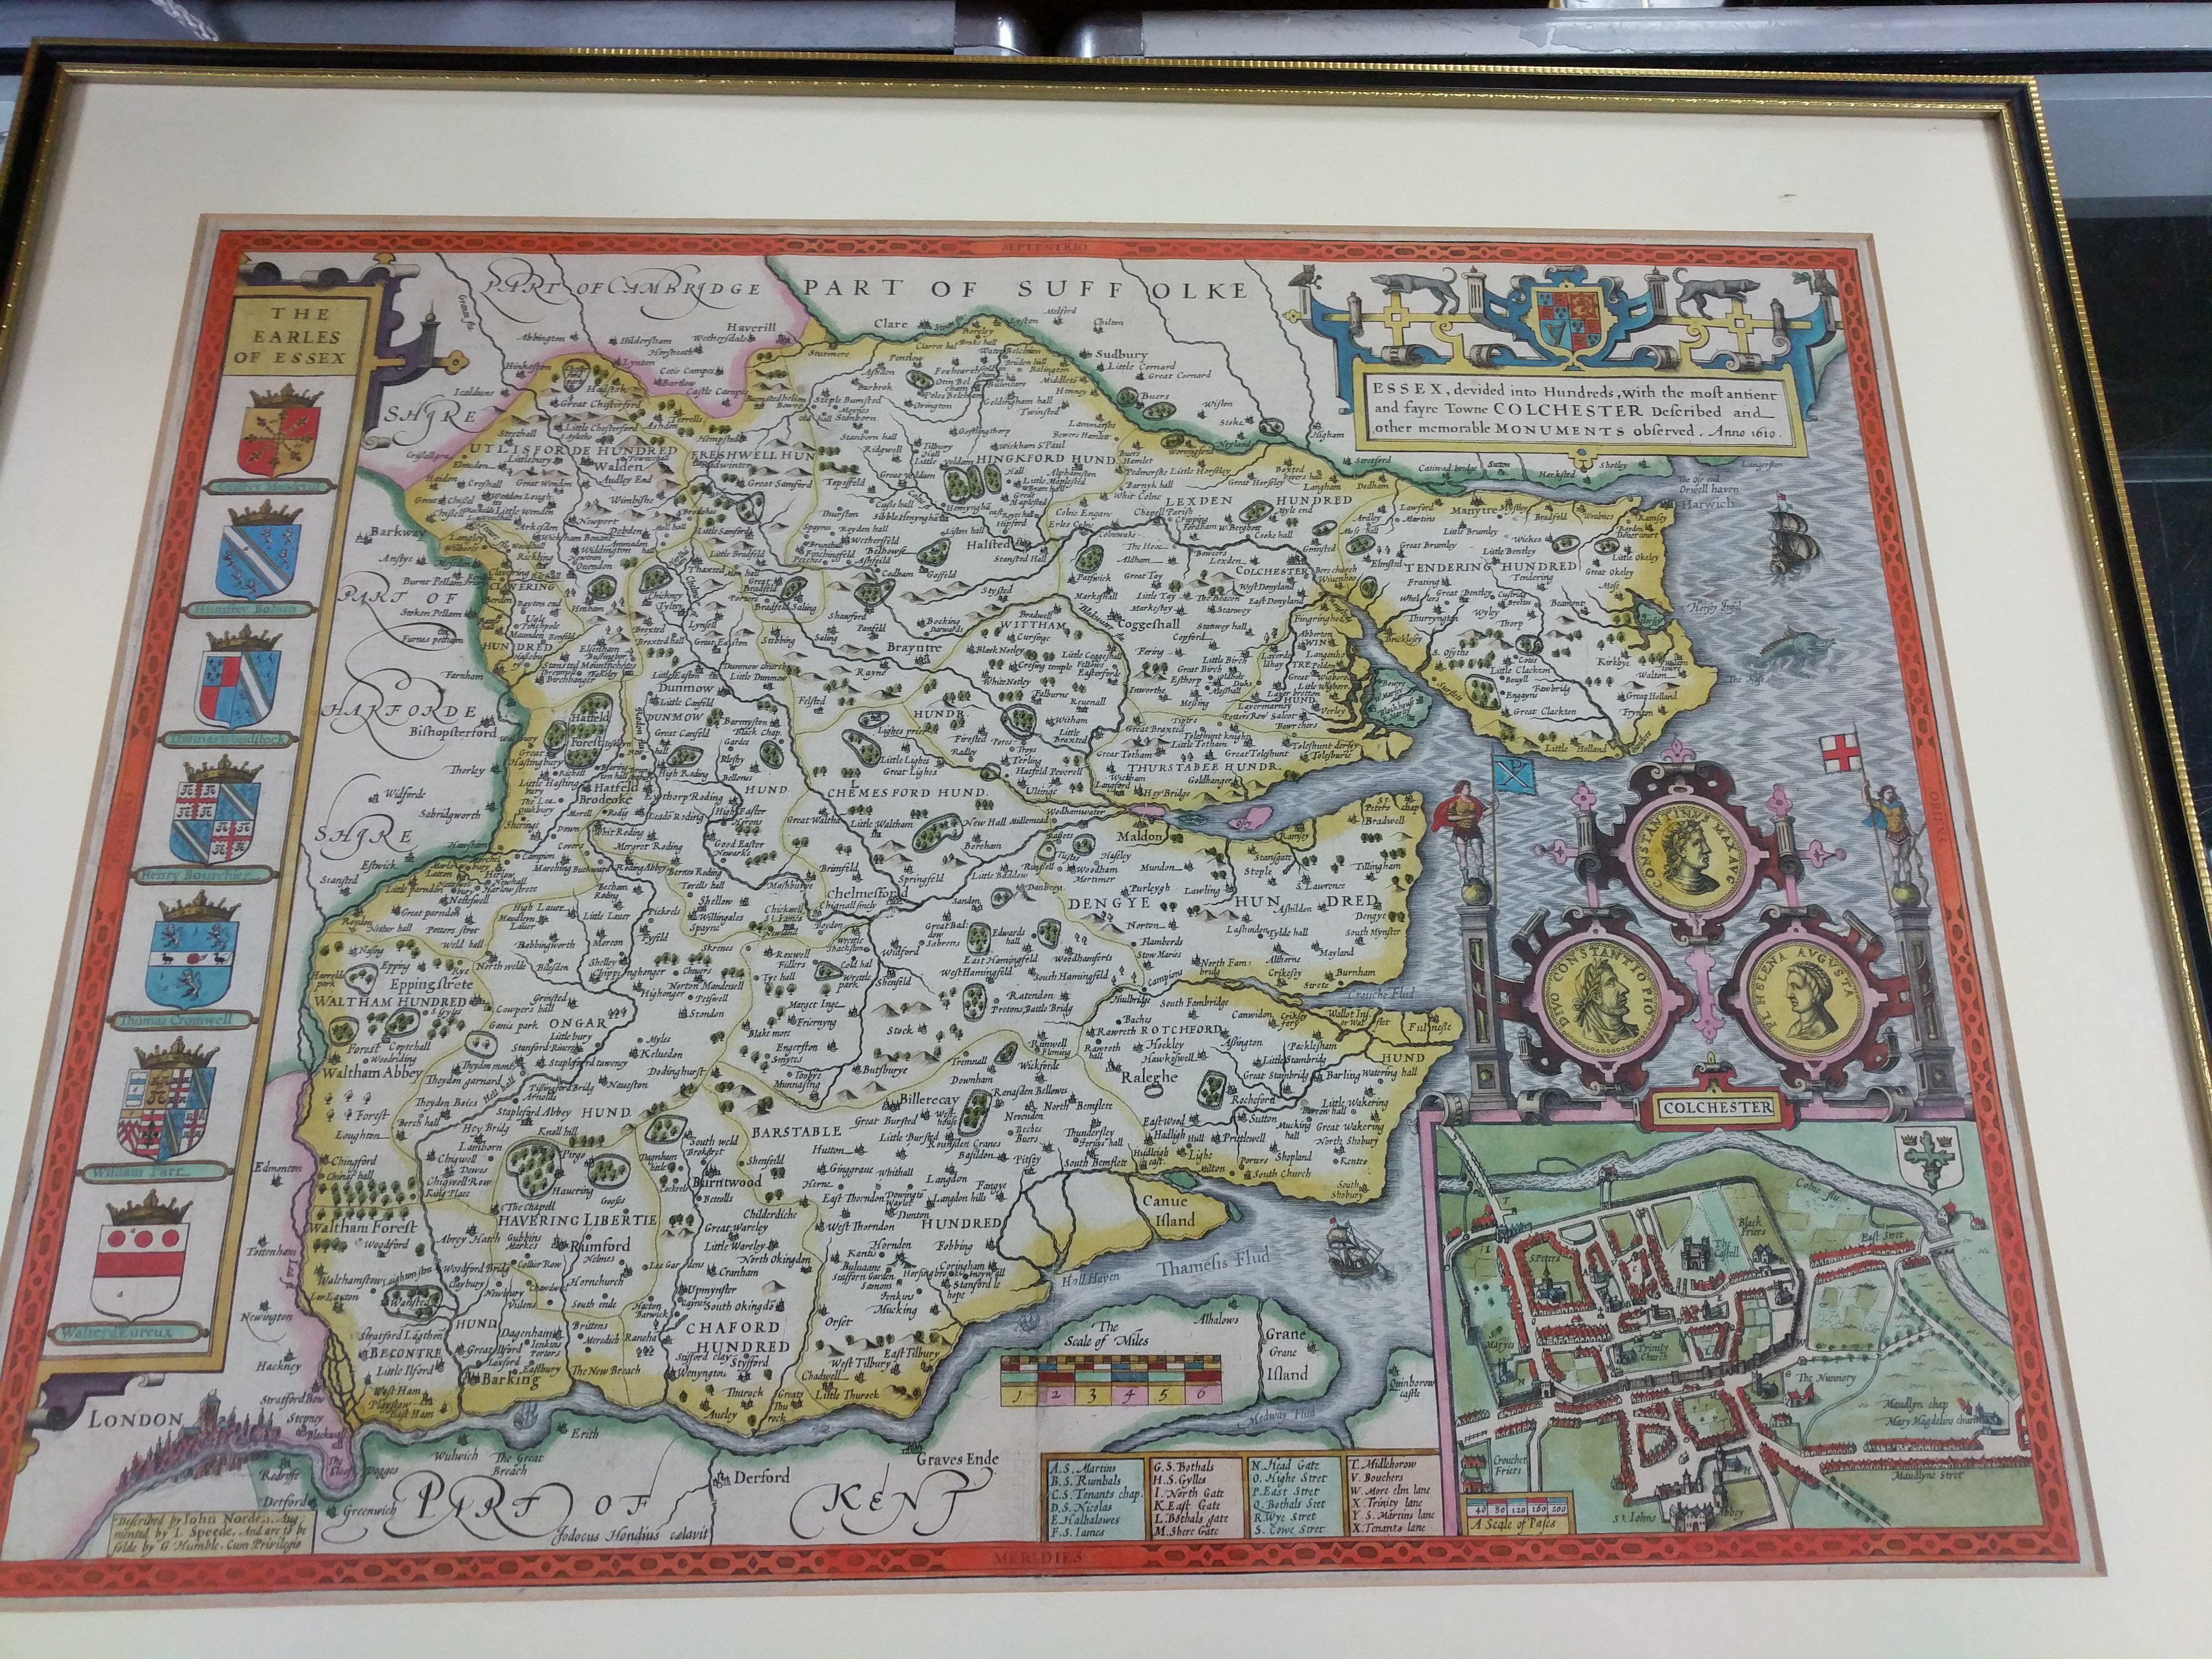 A 17th Century map of Essex with a street map of Colchester and crests of the Earp's of Essex by